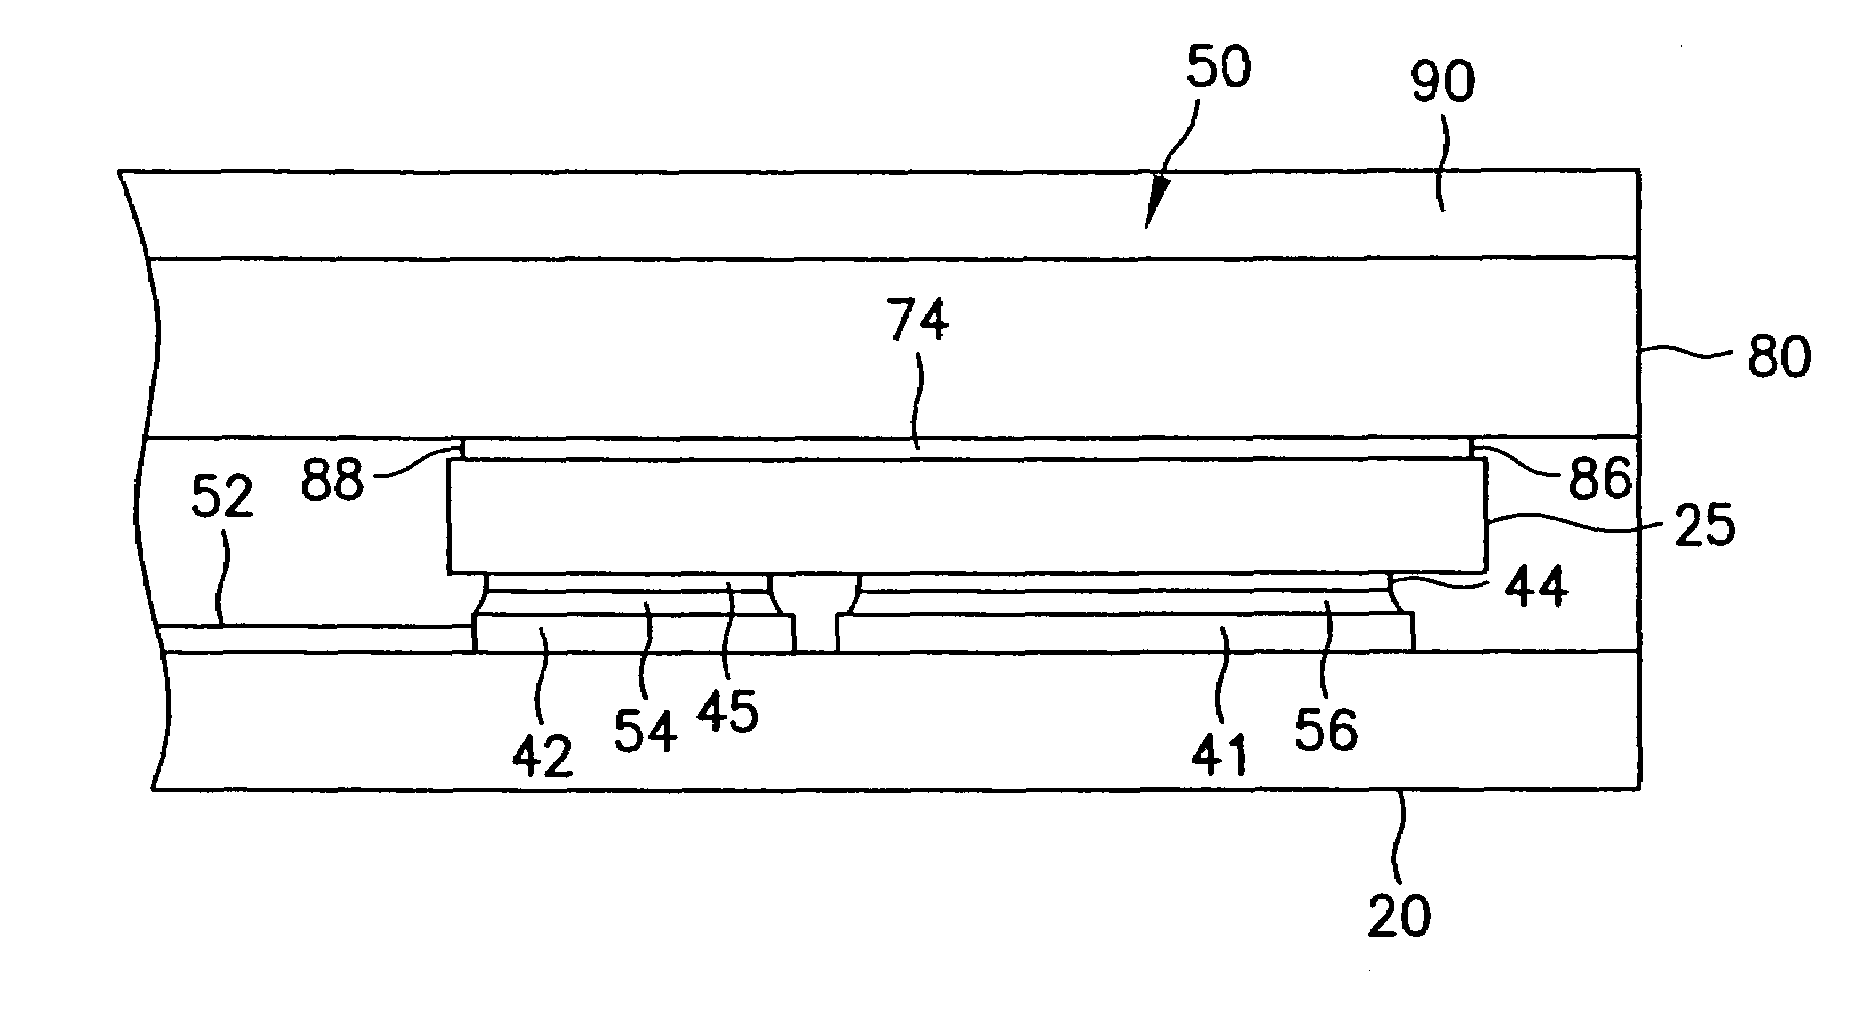 Semiconductor device module with flip chip devices on a common lead frame